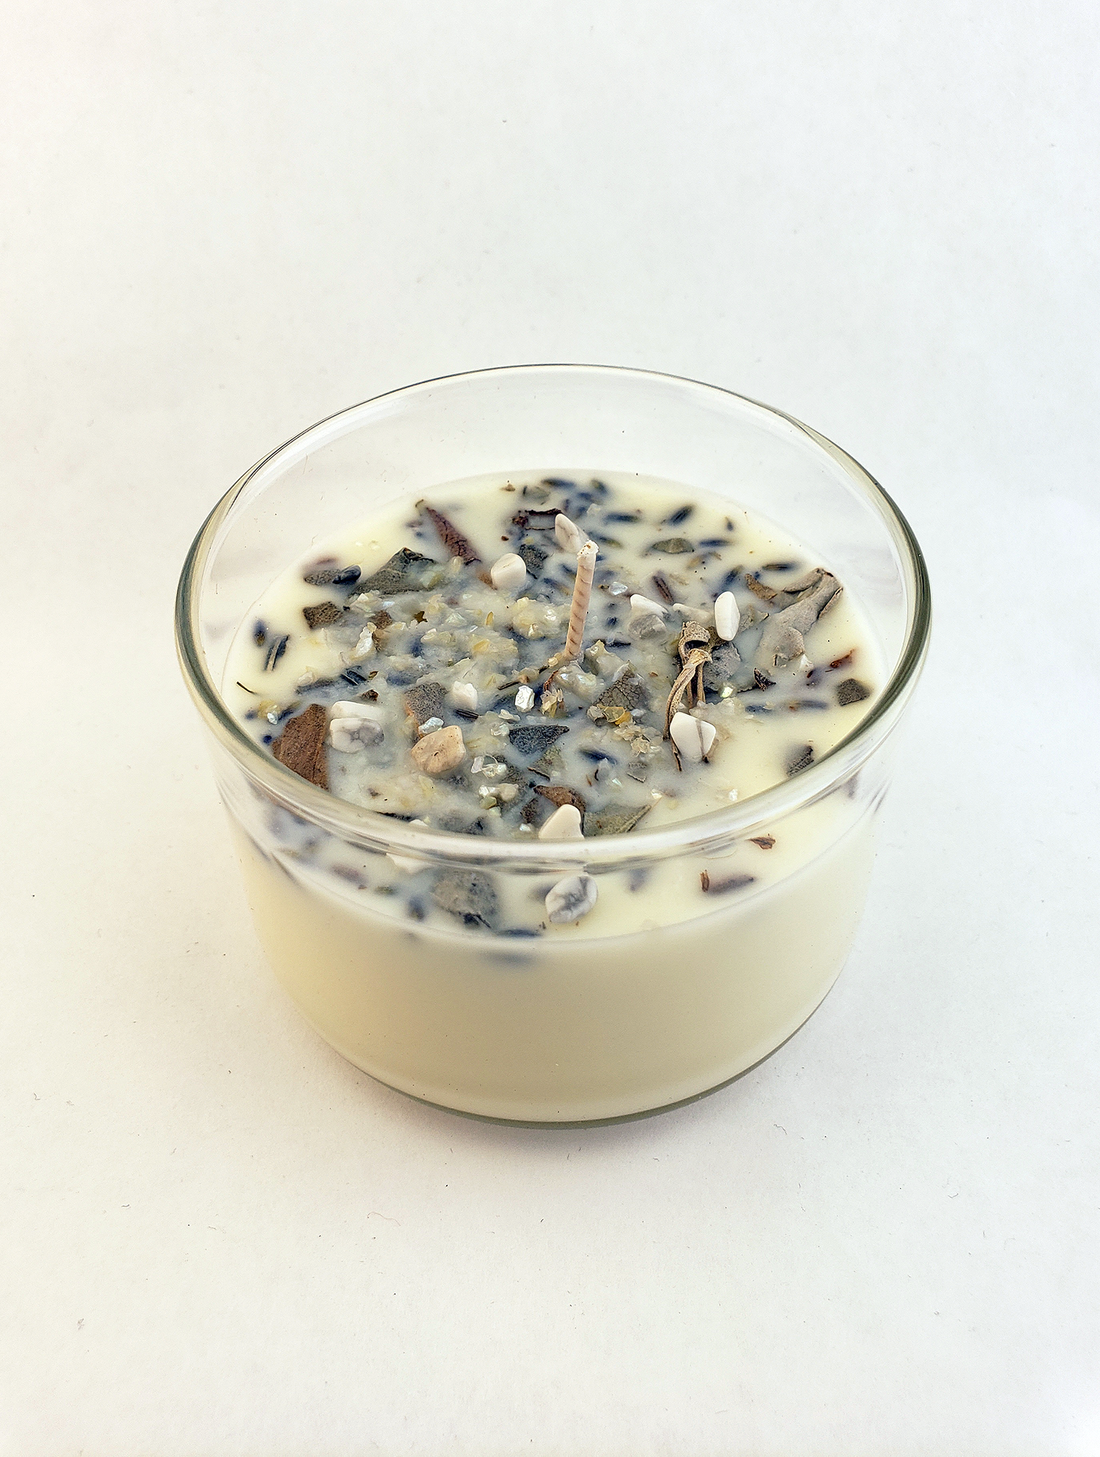 Stress Relief - Coconut Soy Wax Handmade Scented Tumbler Candle